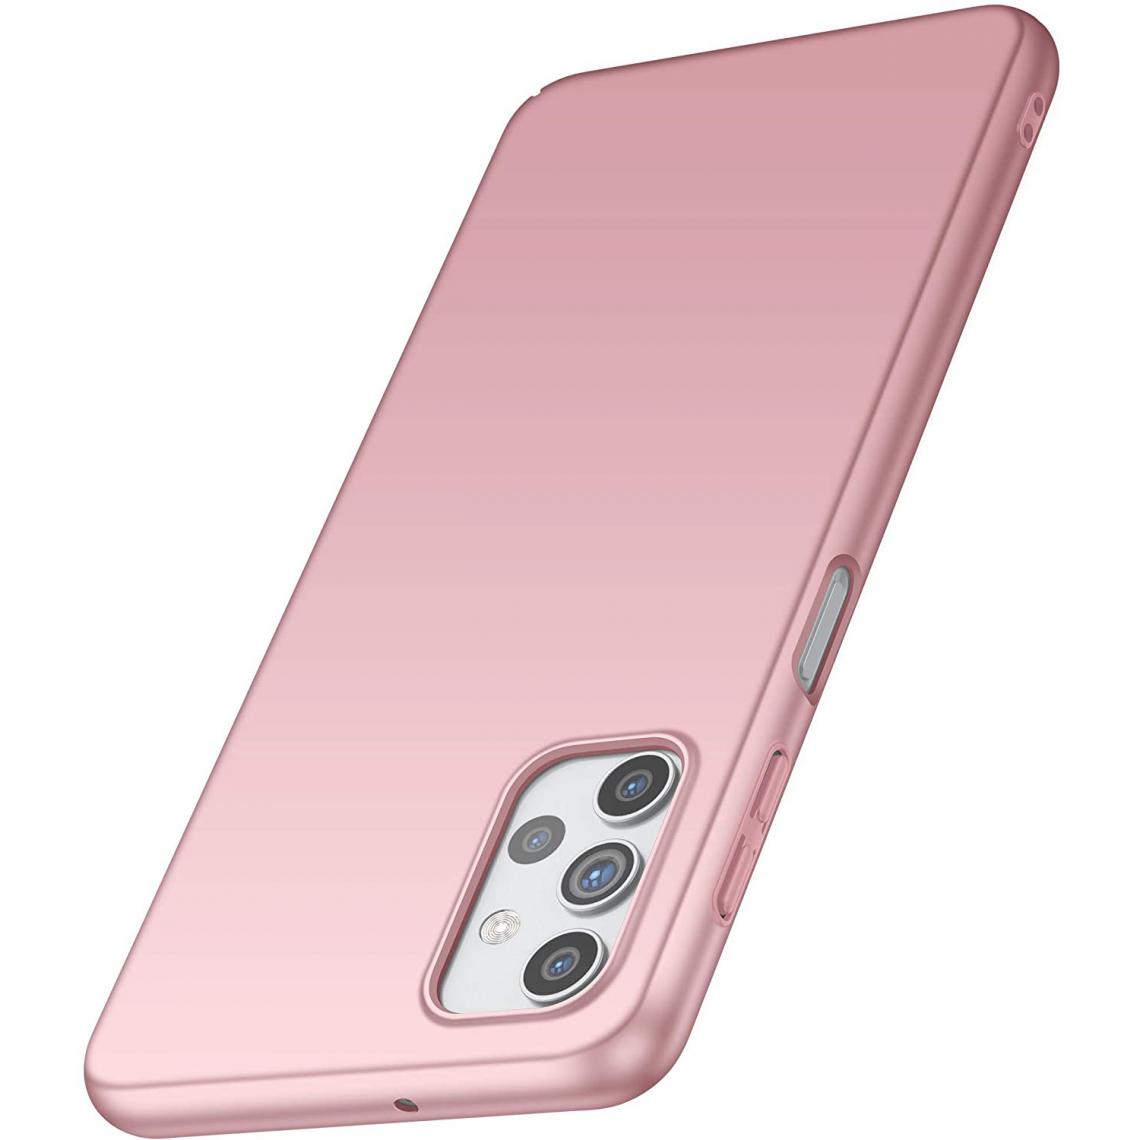 Little Boutik - Coque Silicone TPU Couleur Rose Pour Samsung A32 5G Little Boutik ? Couleur : - Coque, étui smartphone